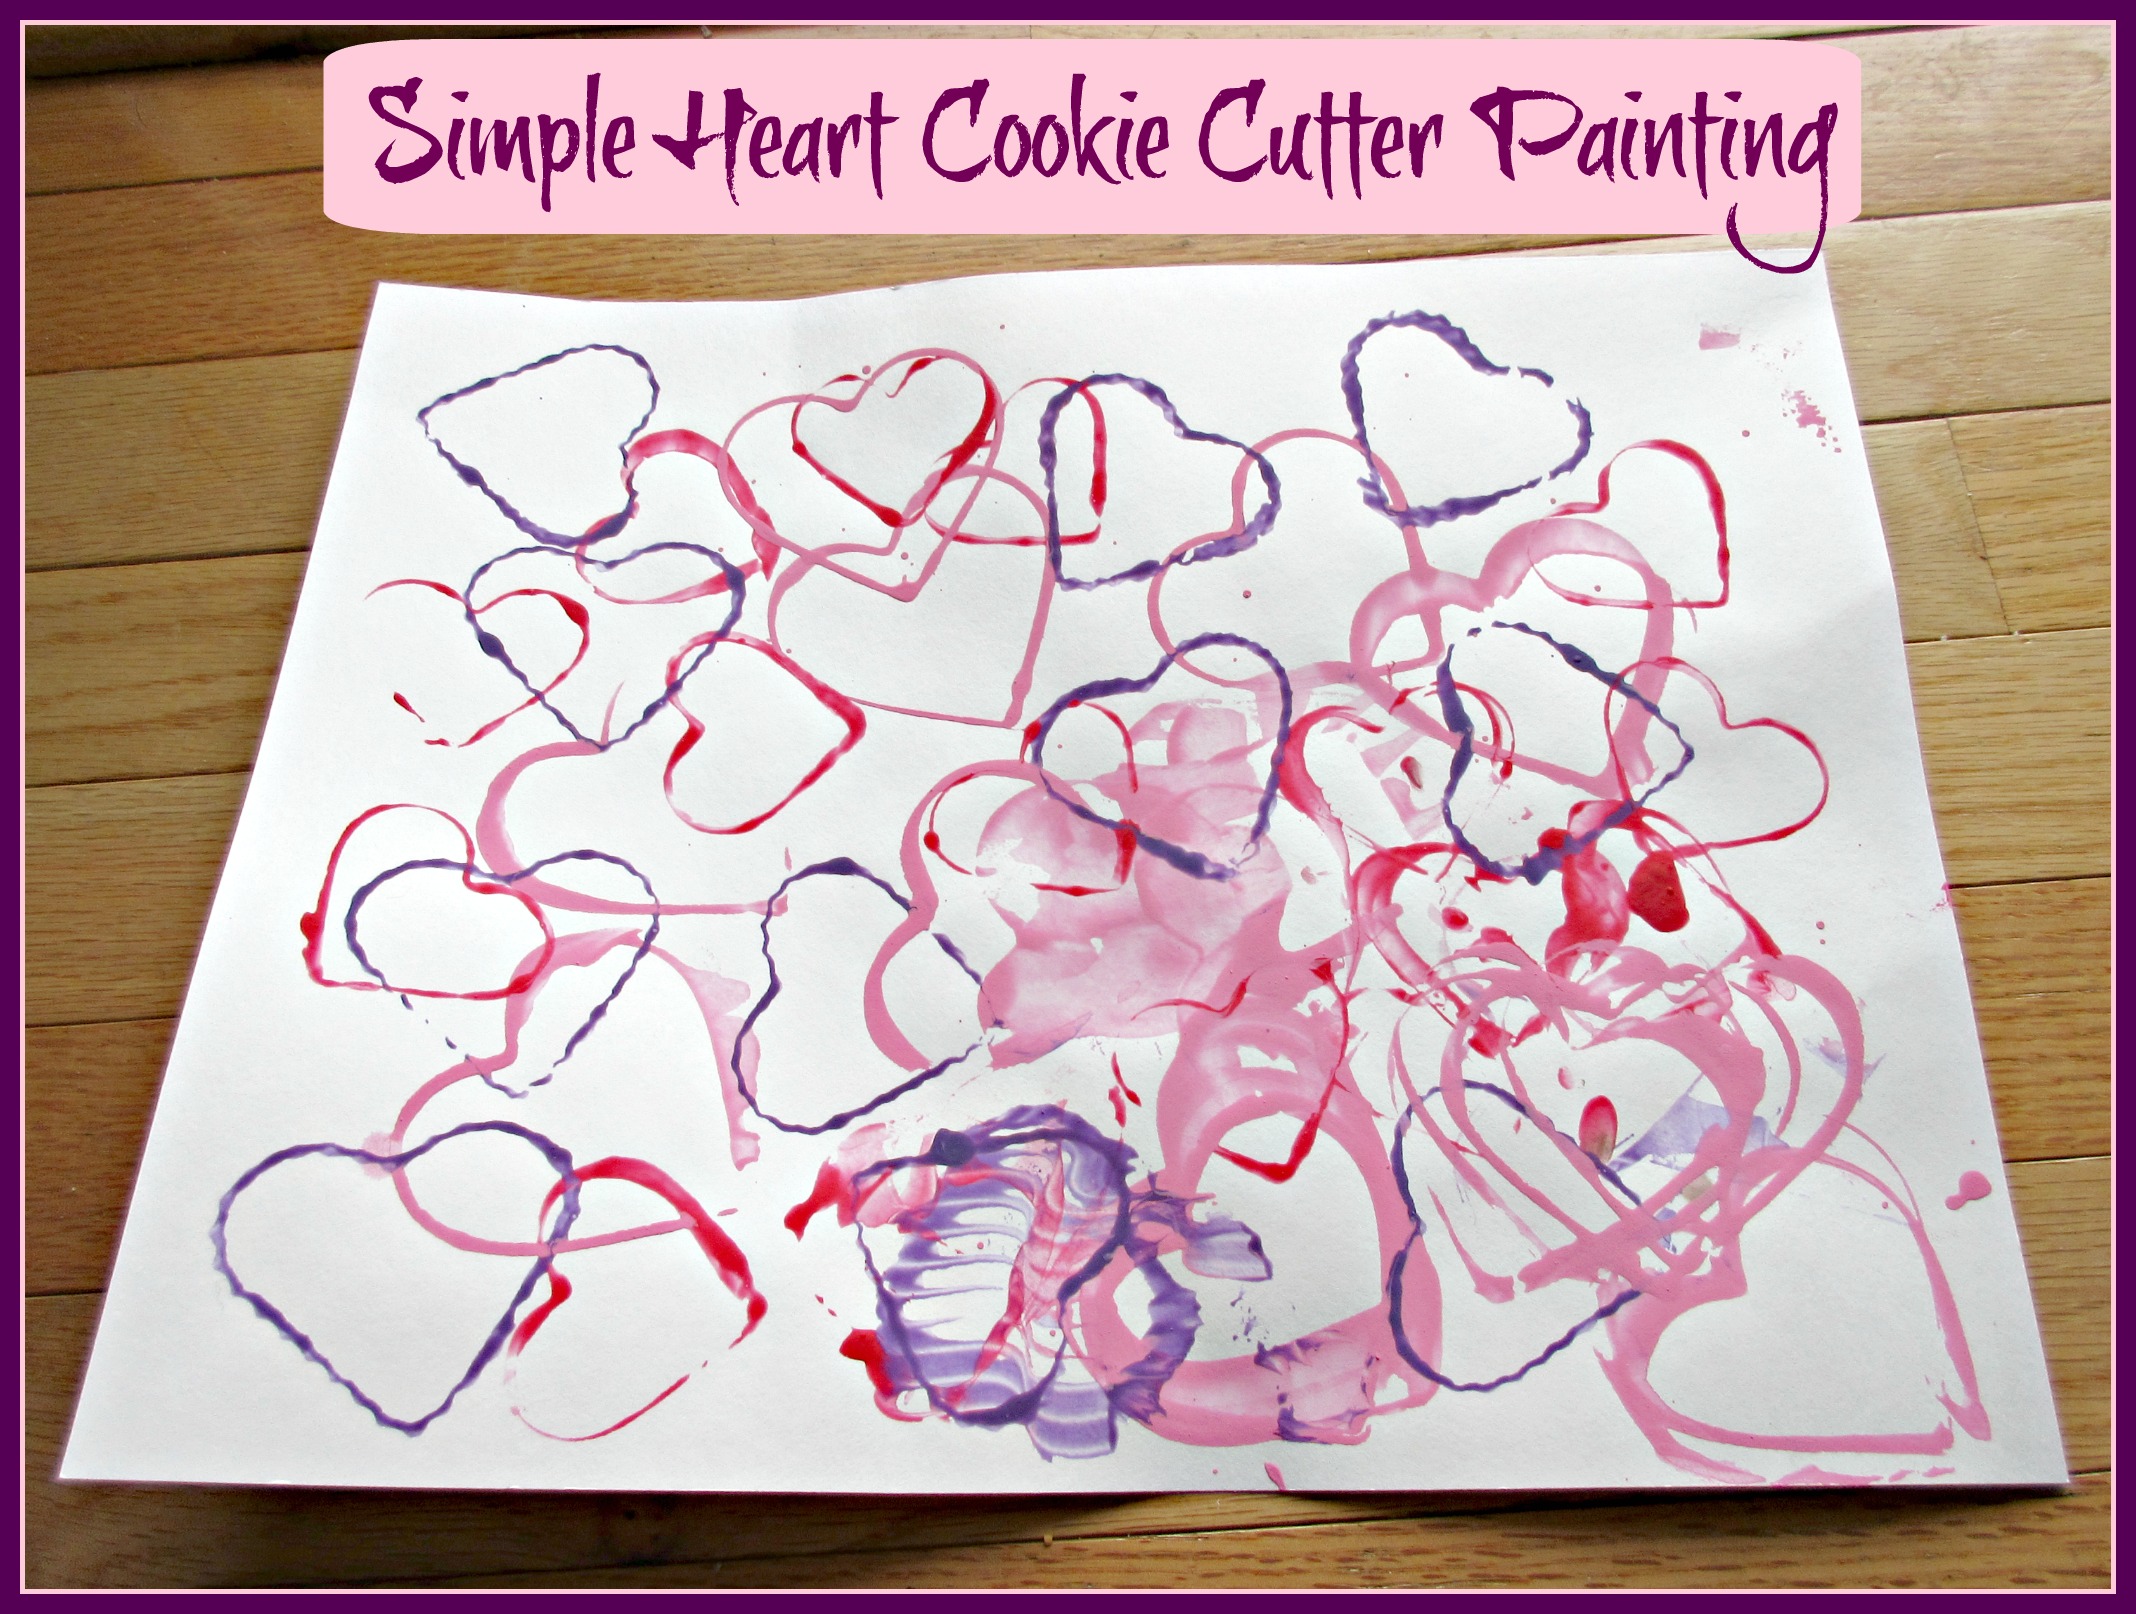 Simple Heart Cookie Cutter